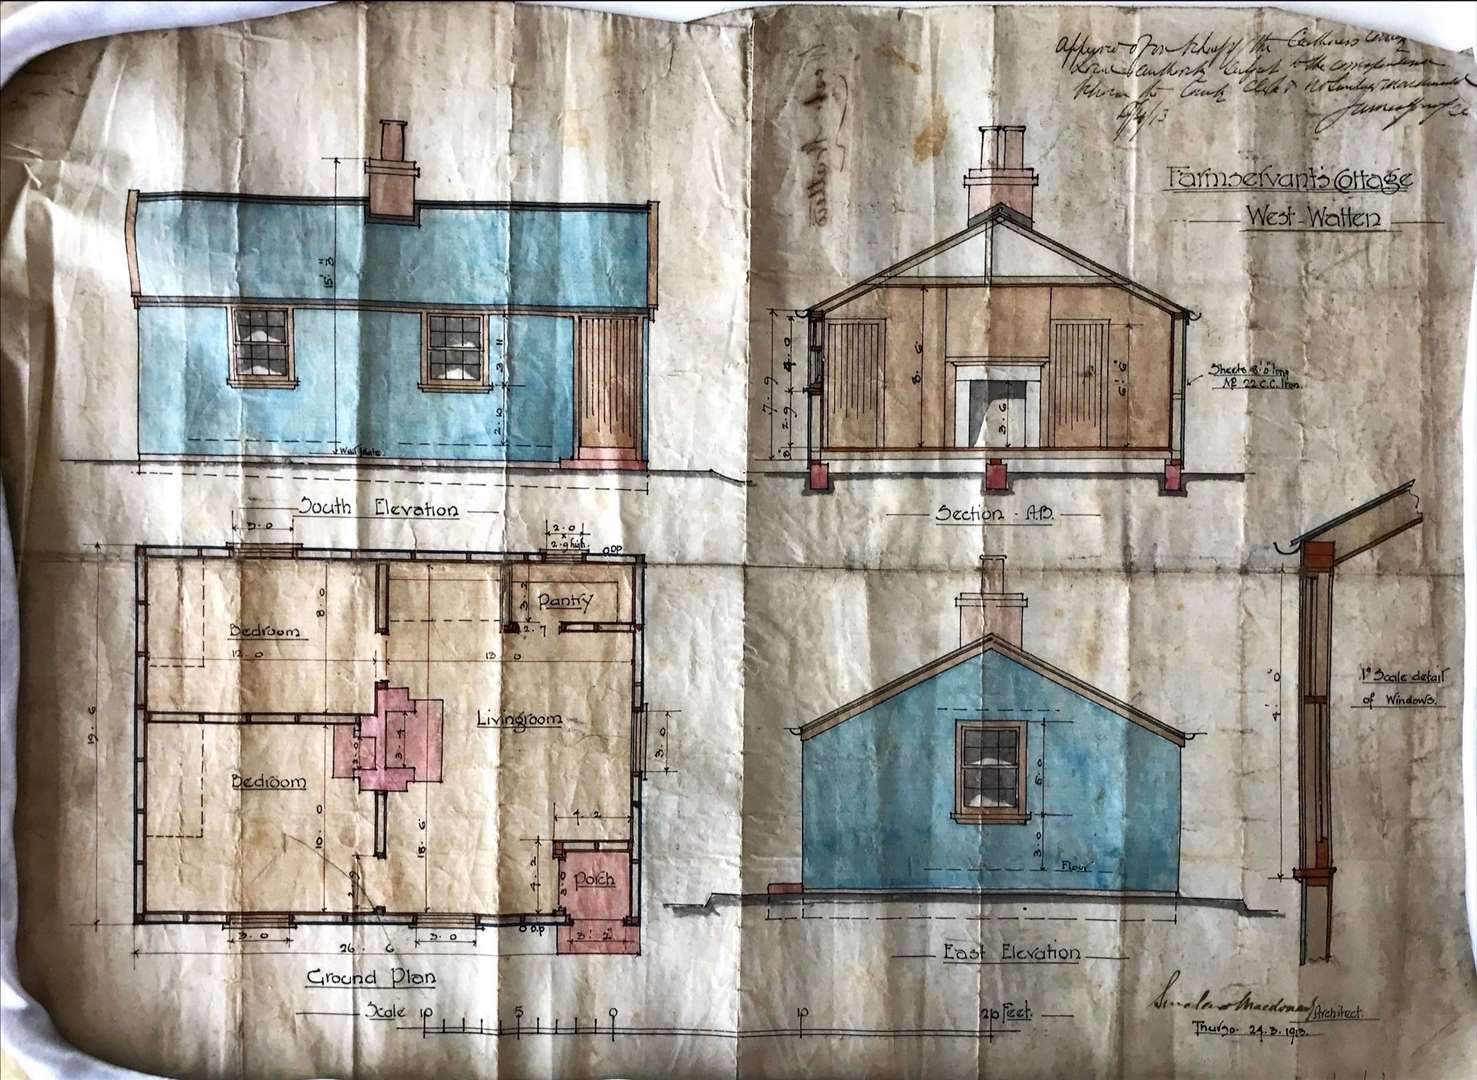 Plans by architect Sinclair Macdonald for a farm servant's cottage at West Watten, dated 1913. Picture: Nucleus: The Nuclear and Caithness Archives